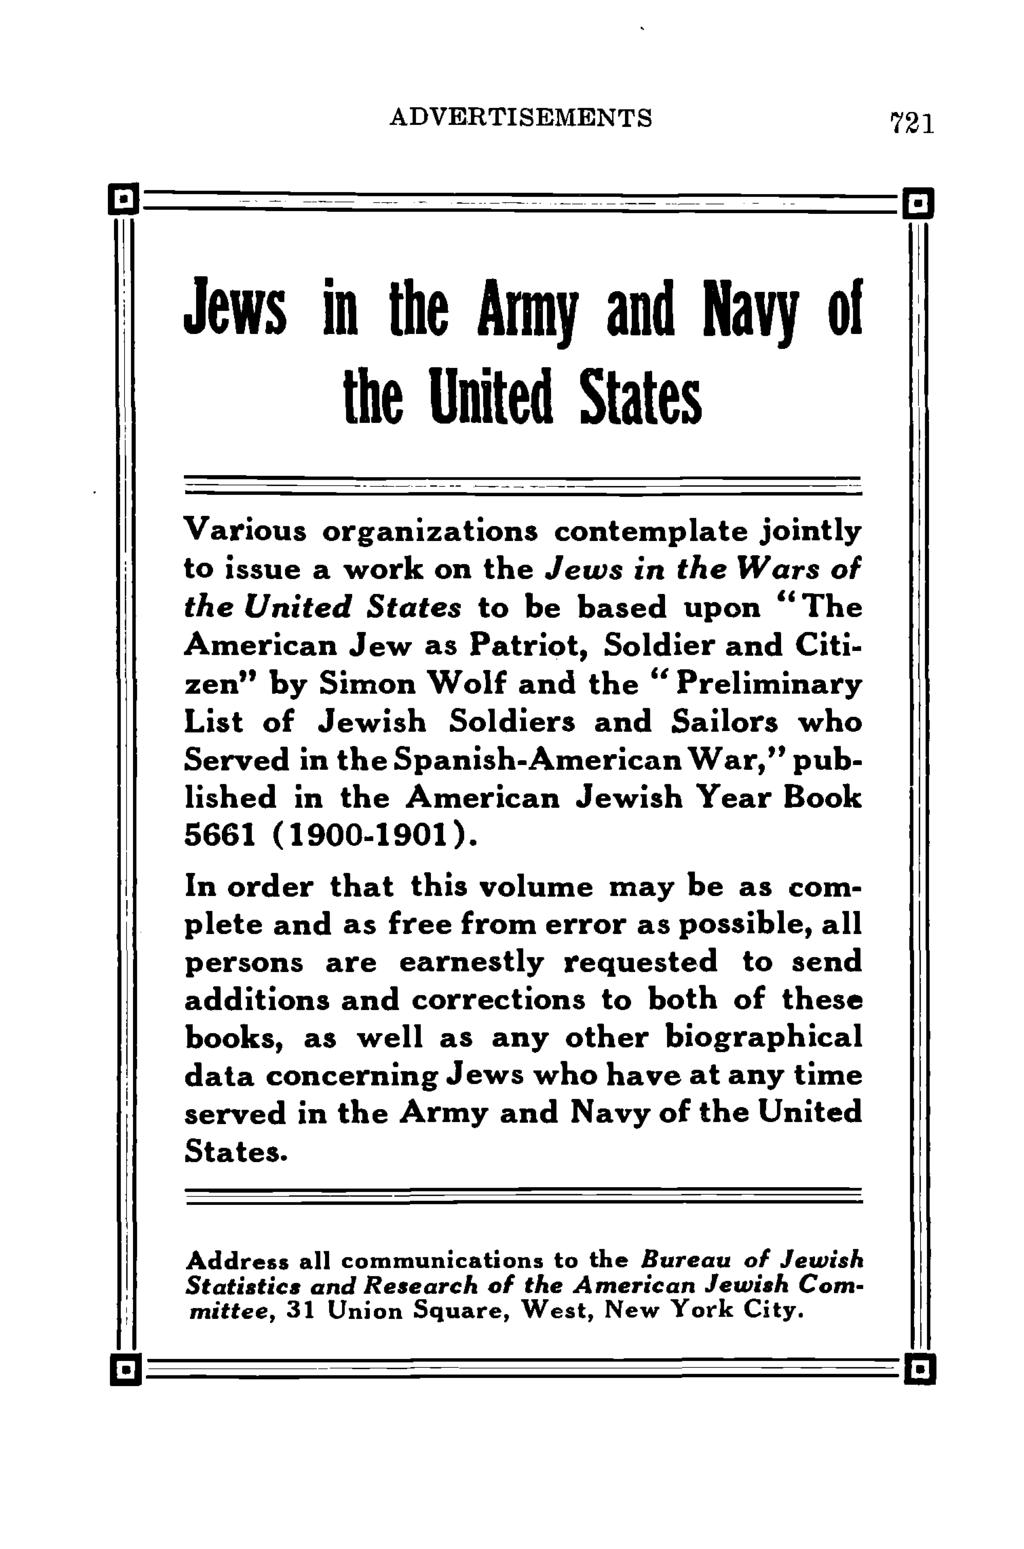 ADVERTISEMENTS 721 Jews in the Army and Navy ol the United States Various organizations contemplate jointly to issue a work on the Jews in the Wars of the United States to be based upon " The